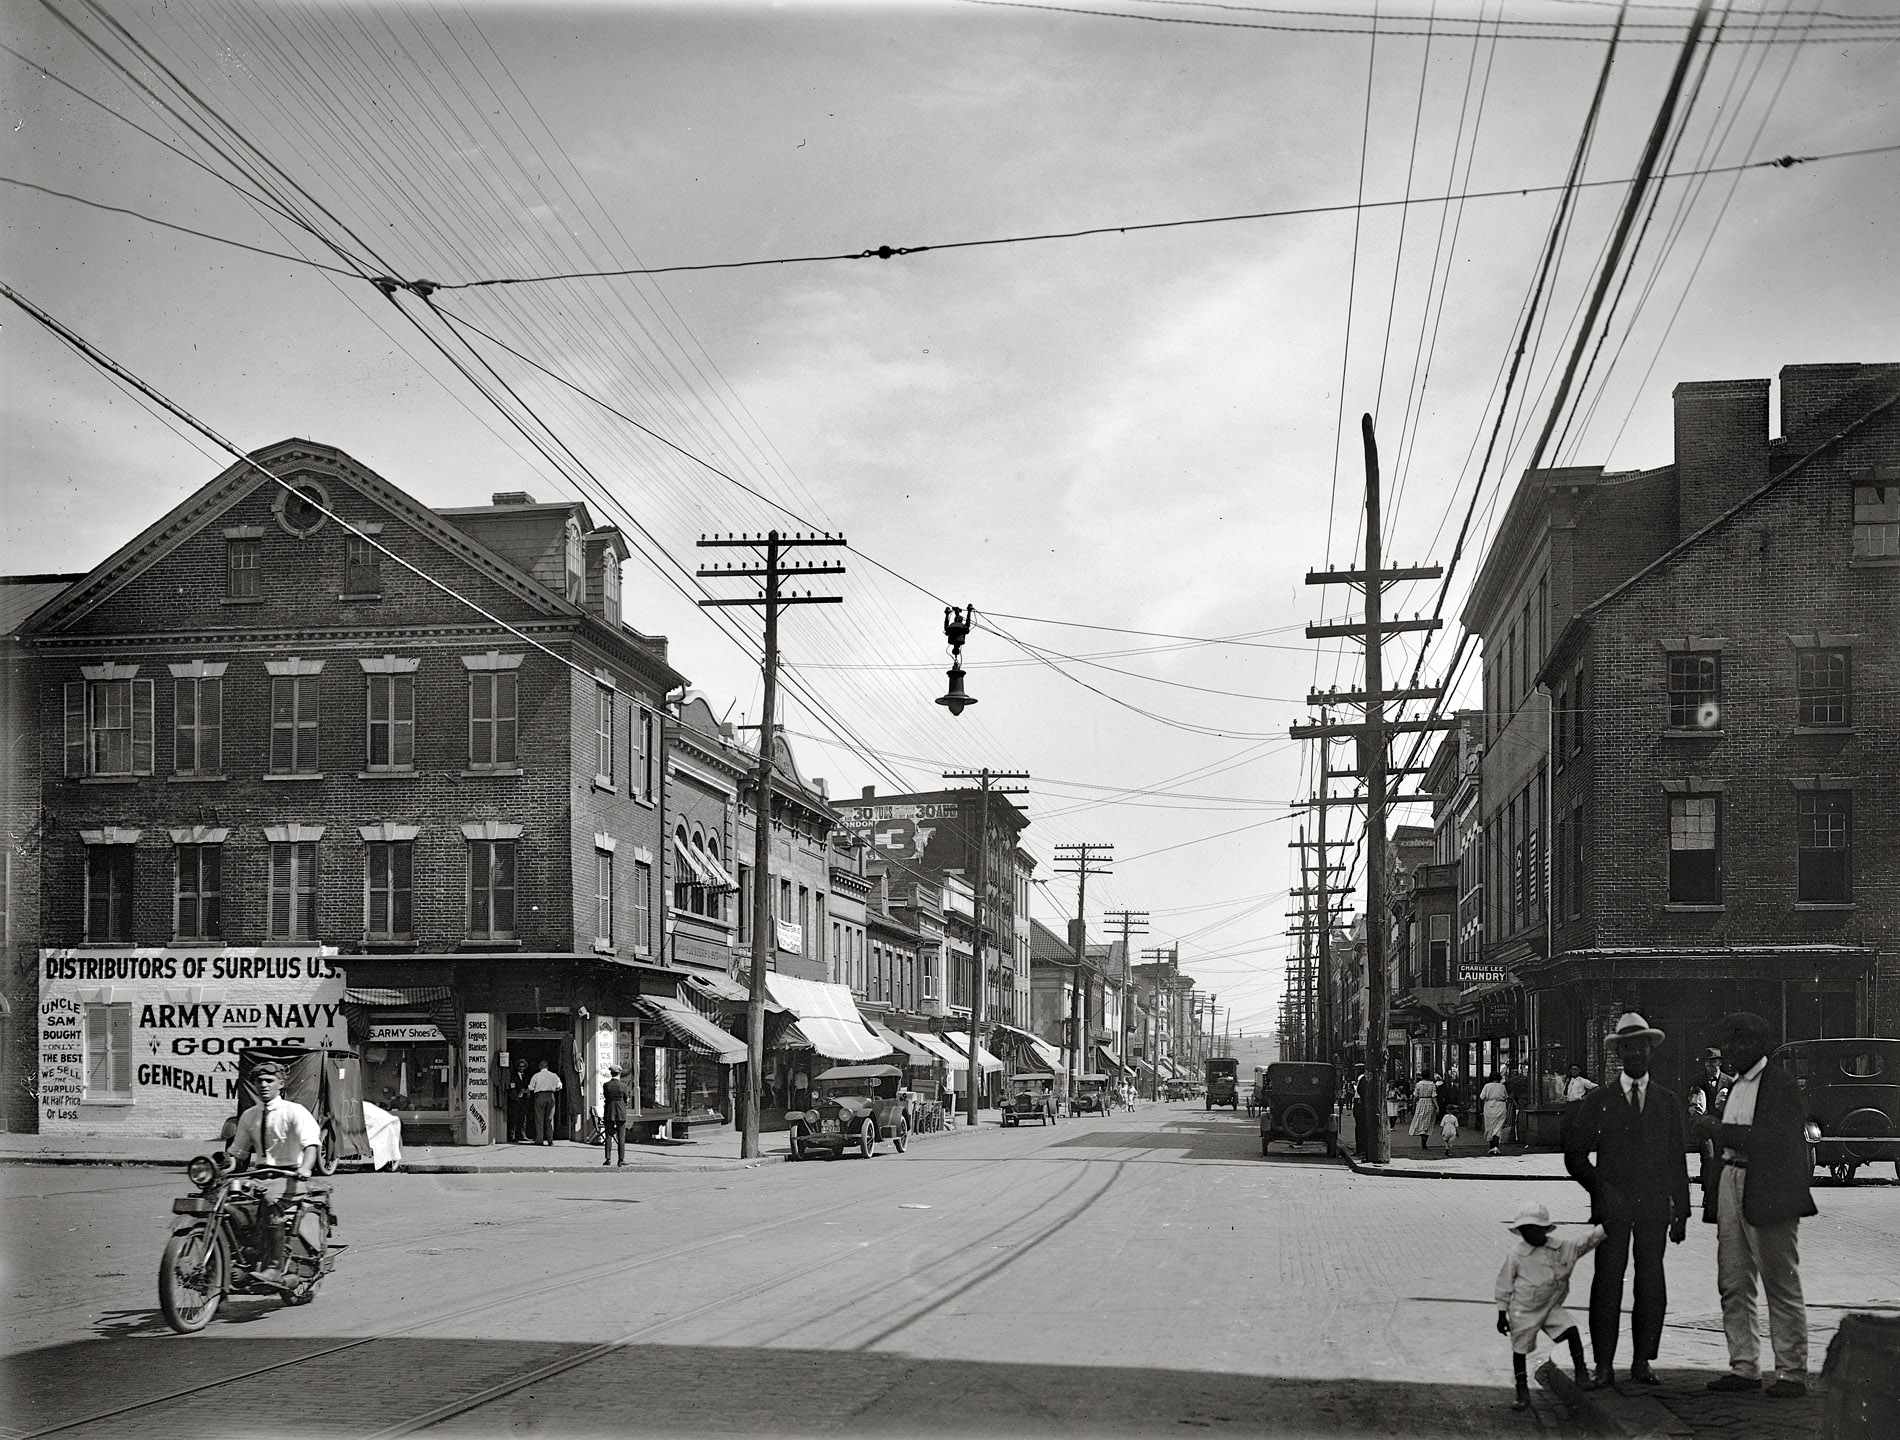 King Street in Alexandria, Virginia. 1921 or 1922. View full size. National Photo Company Collection glass negative. Who can pinpoint the intersection?